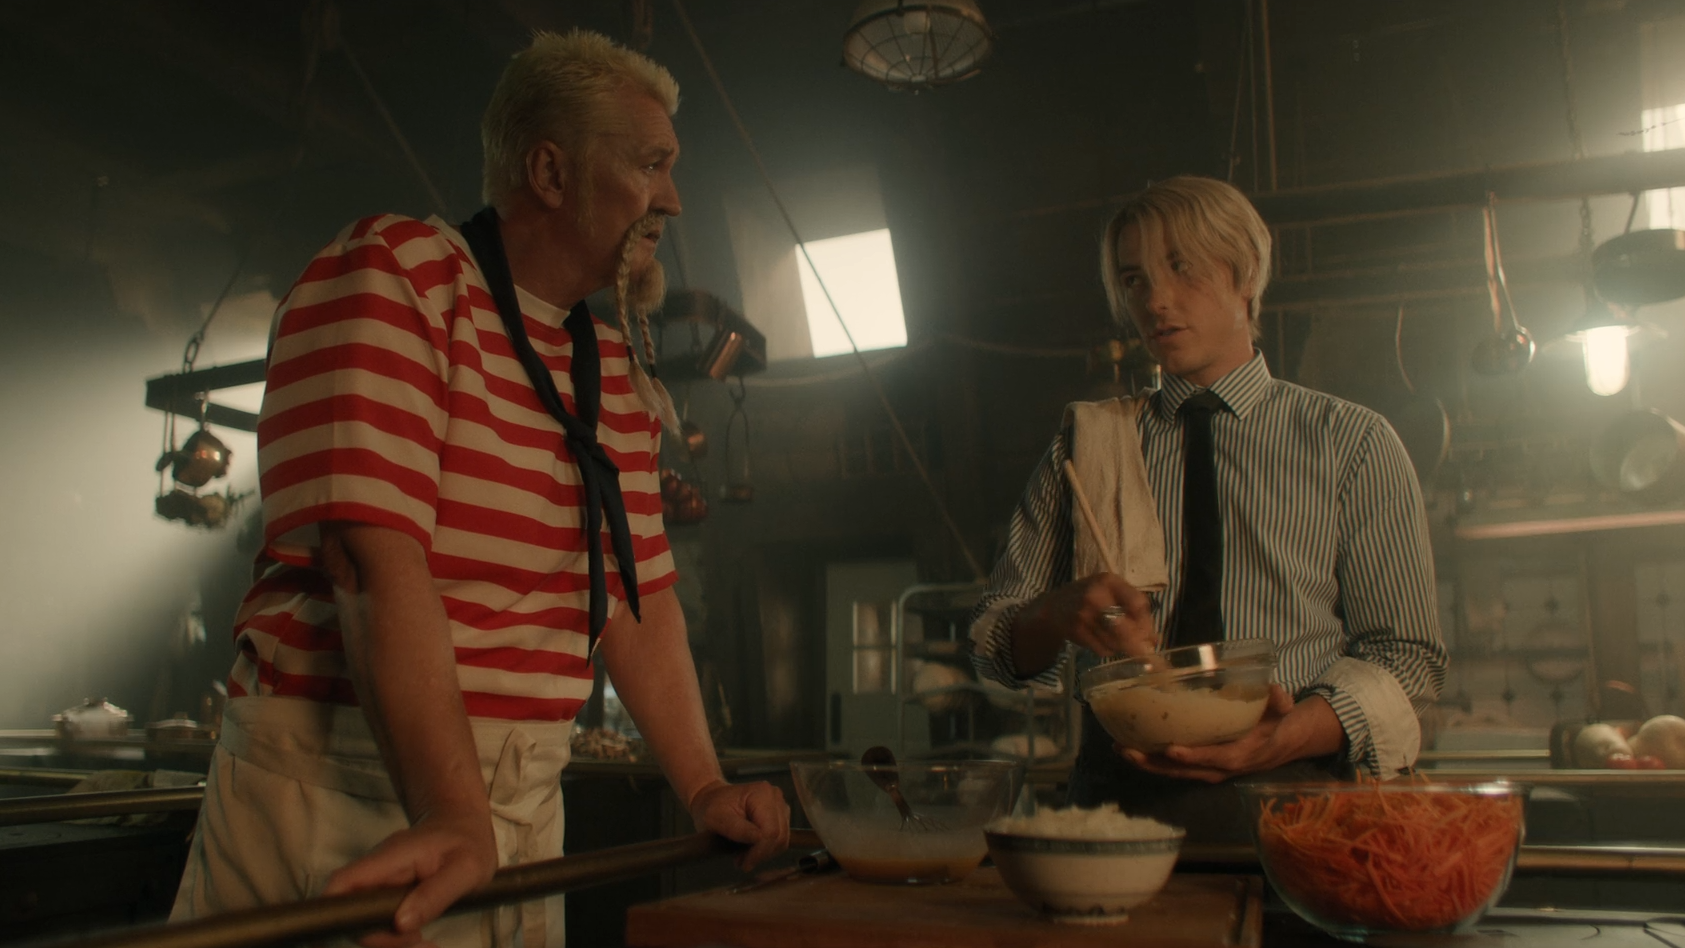 One Piece Live Action Episode 6 The Chef And The Chore Boy Zeff and Sanji cook together